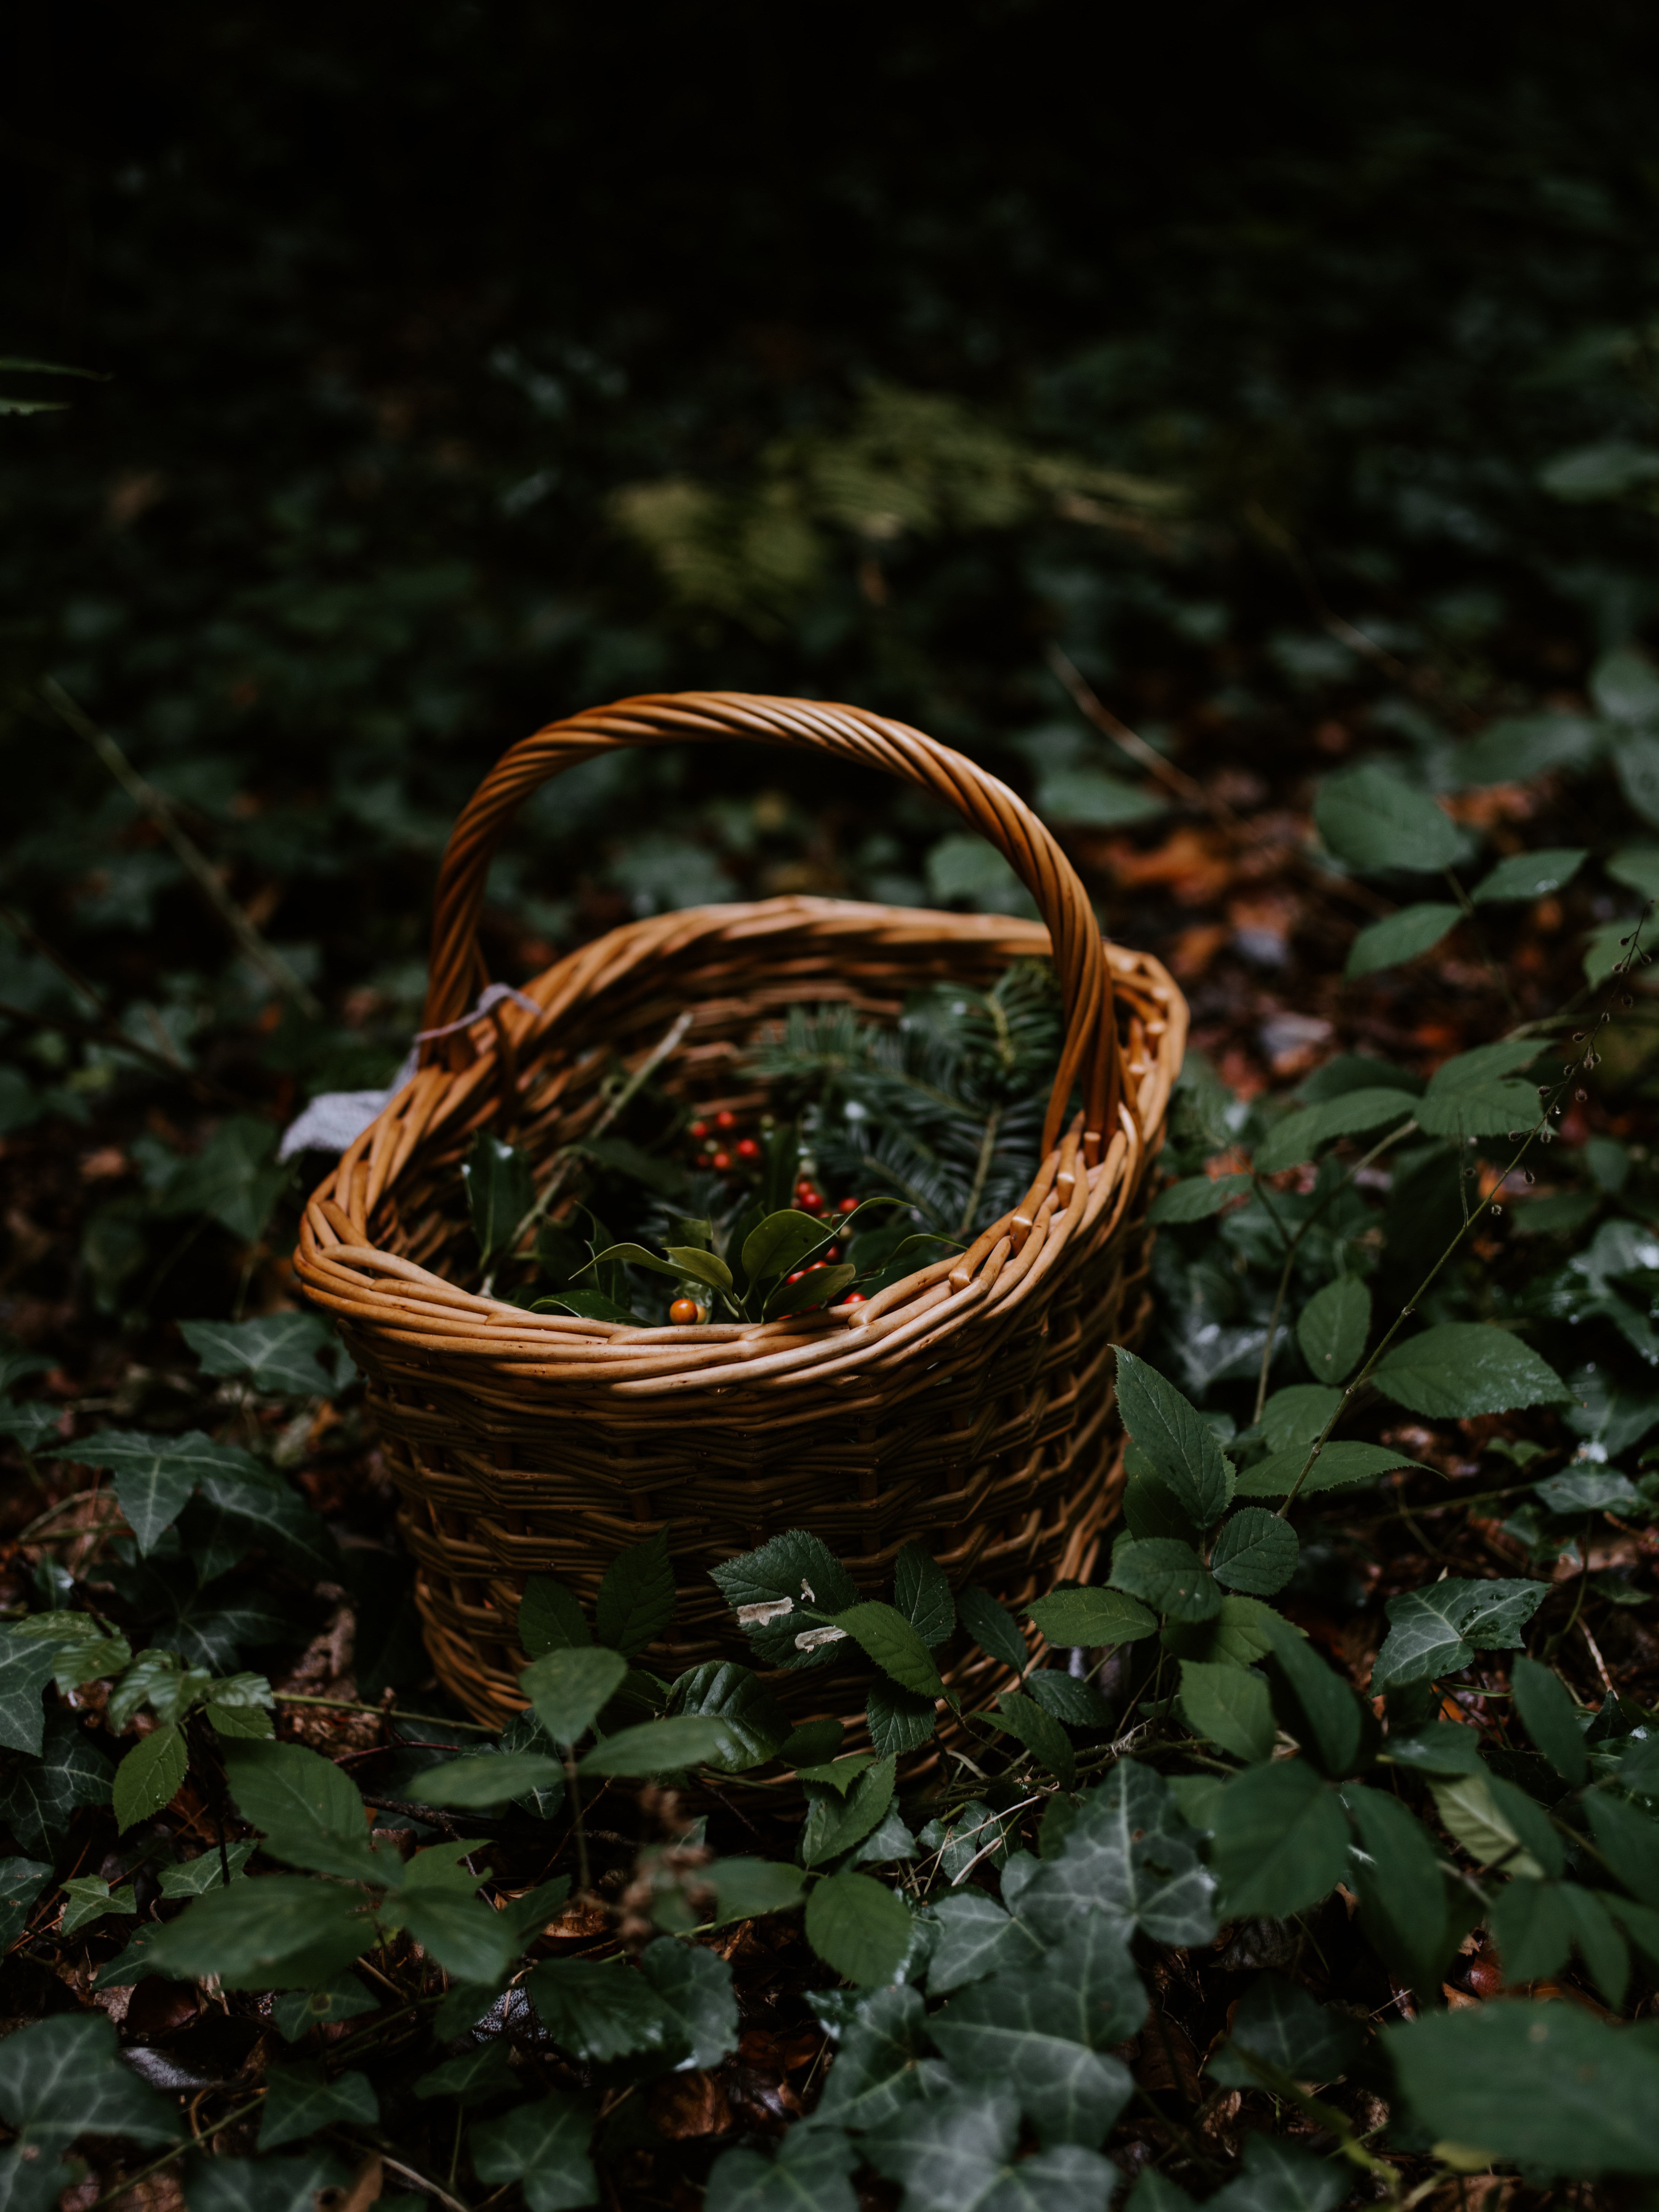 HD wallpaper miscellaneous, nature, berries, miscellanea, branches, basket, wicker, braided